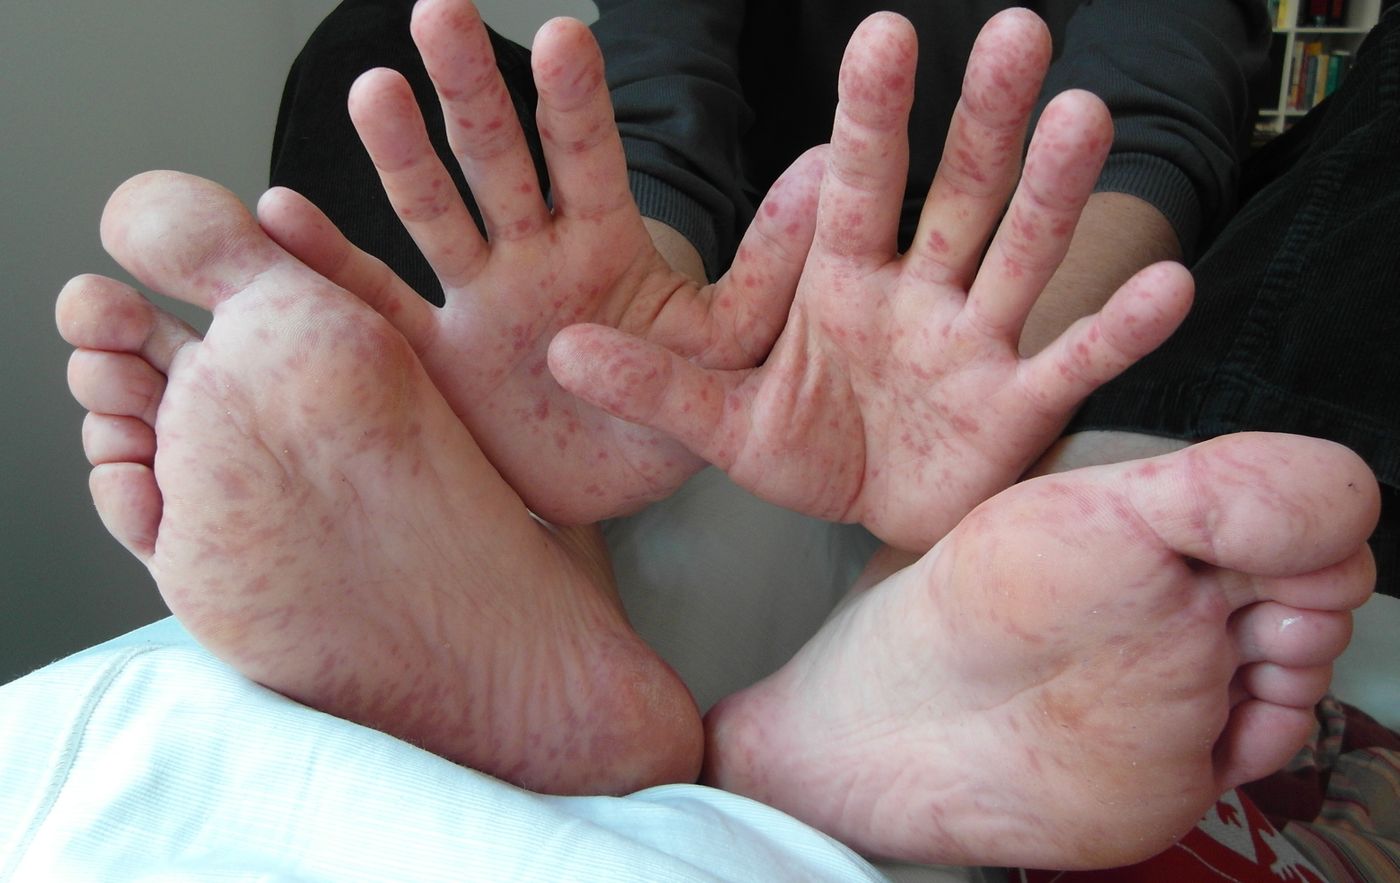 Why are college kids getting infected with hand, foot, and mouth disease? | Image: wikipedia.org